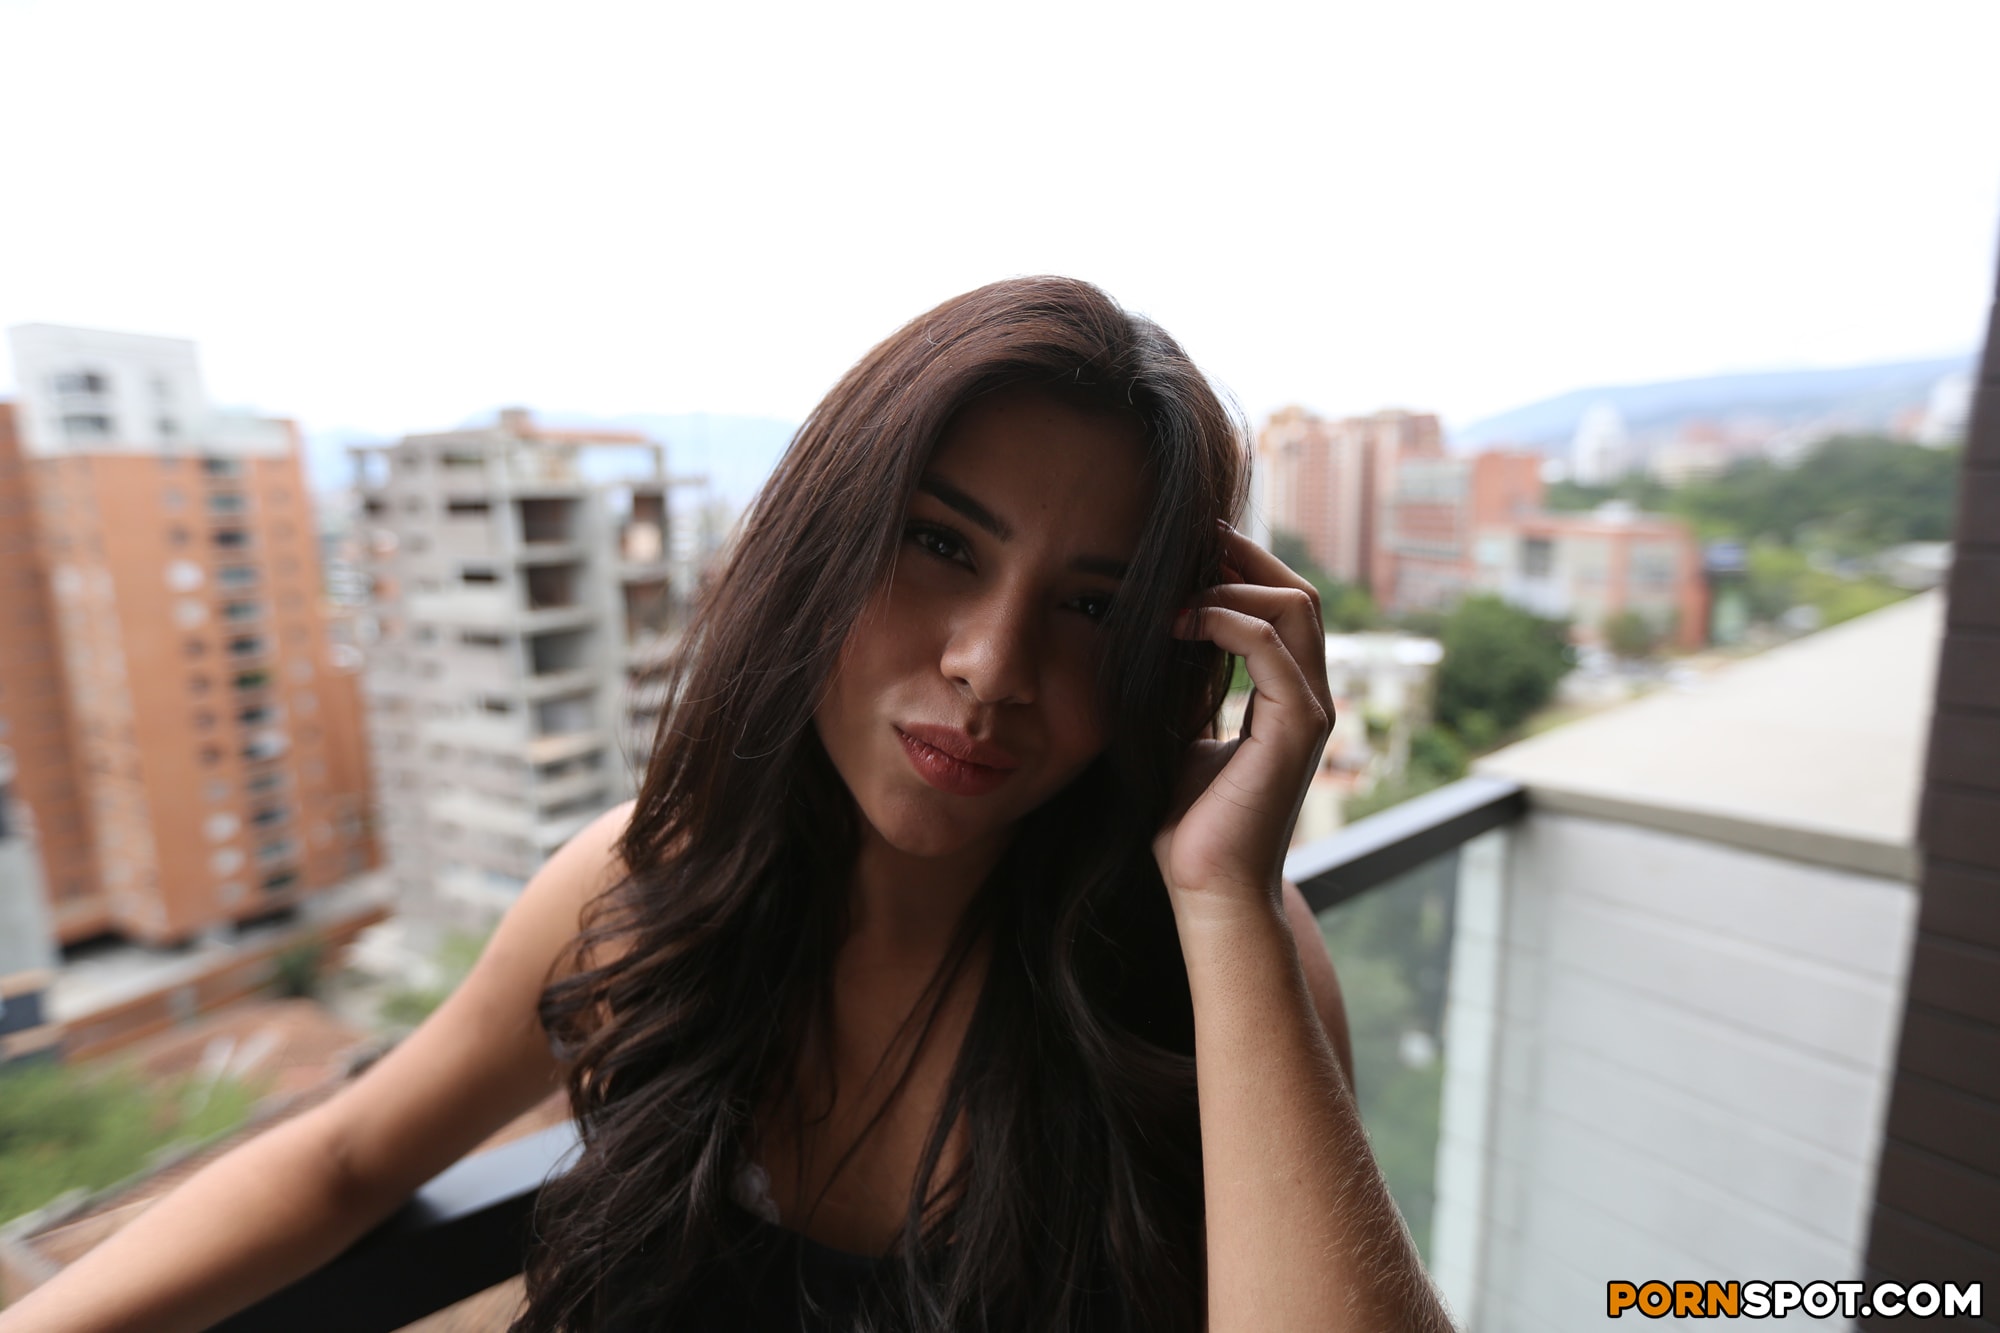 Bangbros 'Hot Colombian Chick Wants To Be A Model' starring Mia Wright (Photo 1)